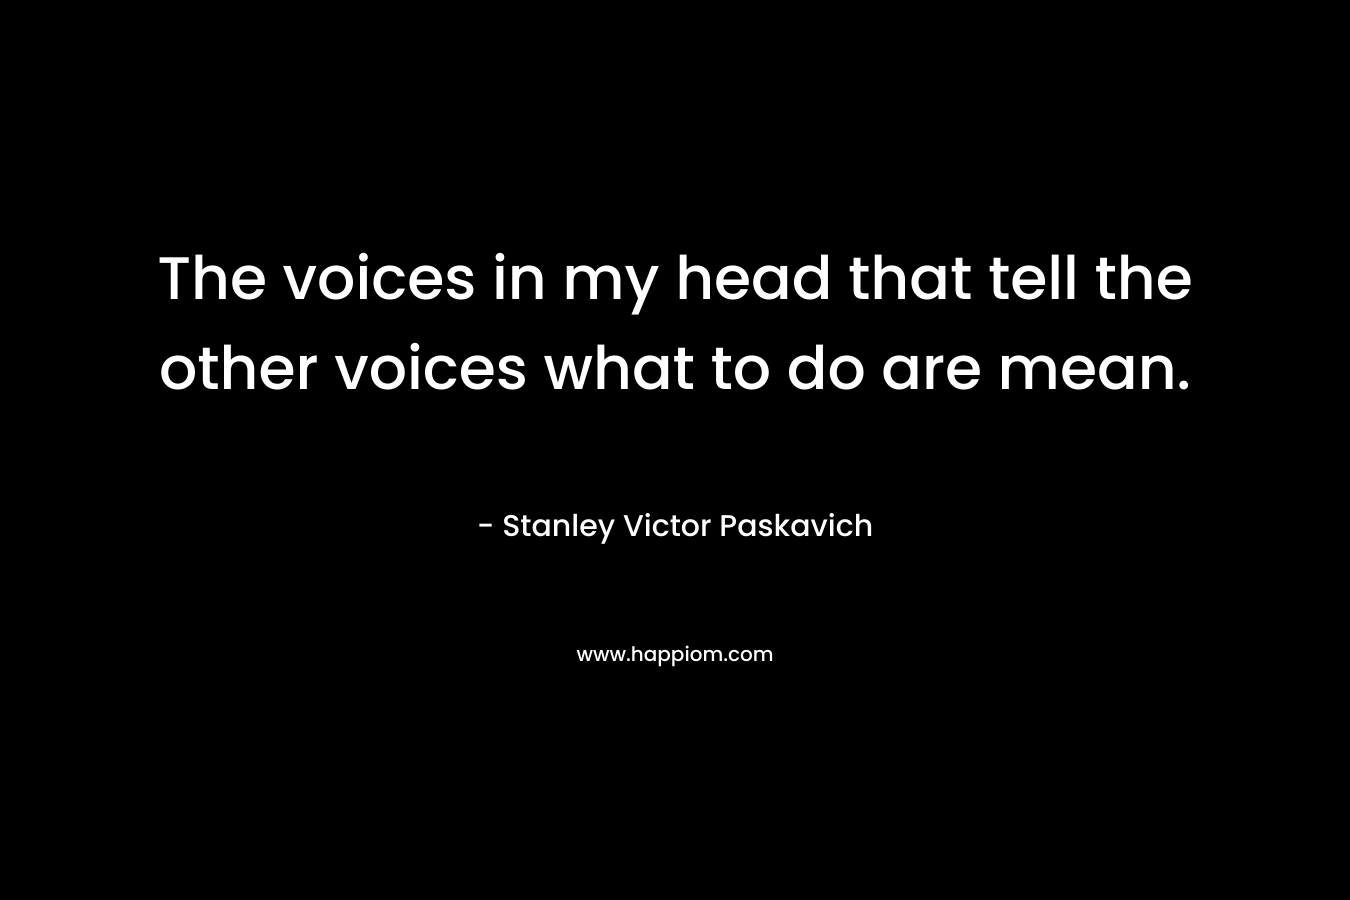 The voices in my head that tell the other voices what to do are mean. – Stanley Victor Paskavich